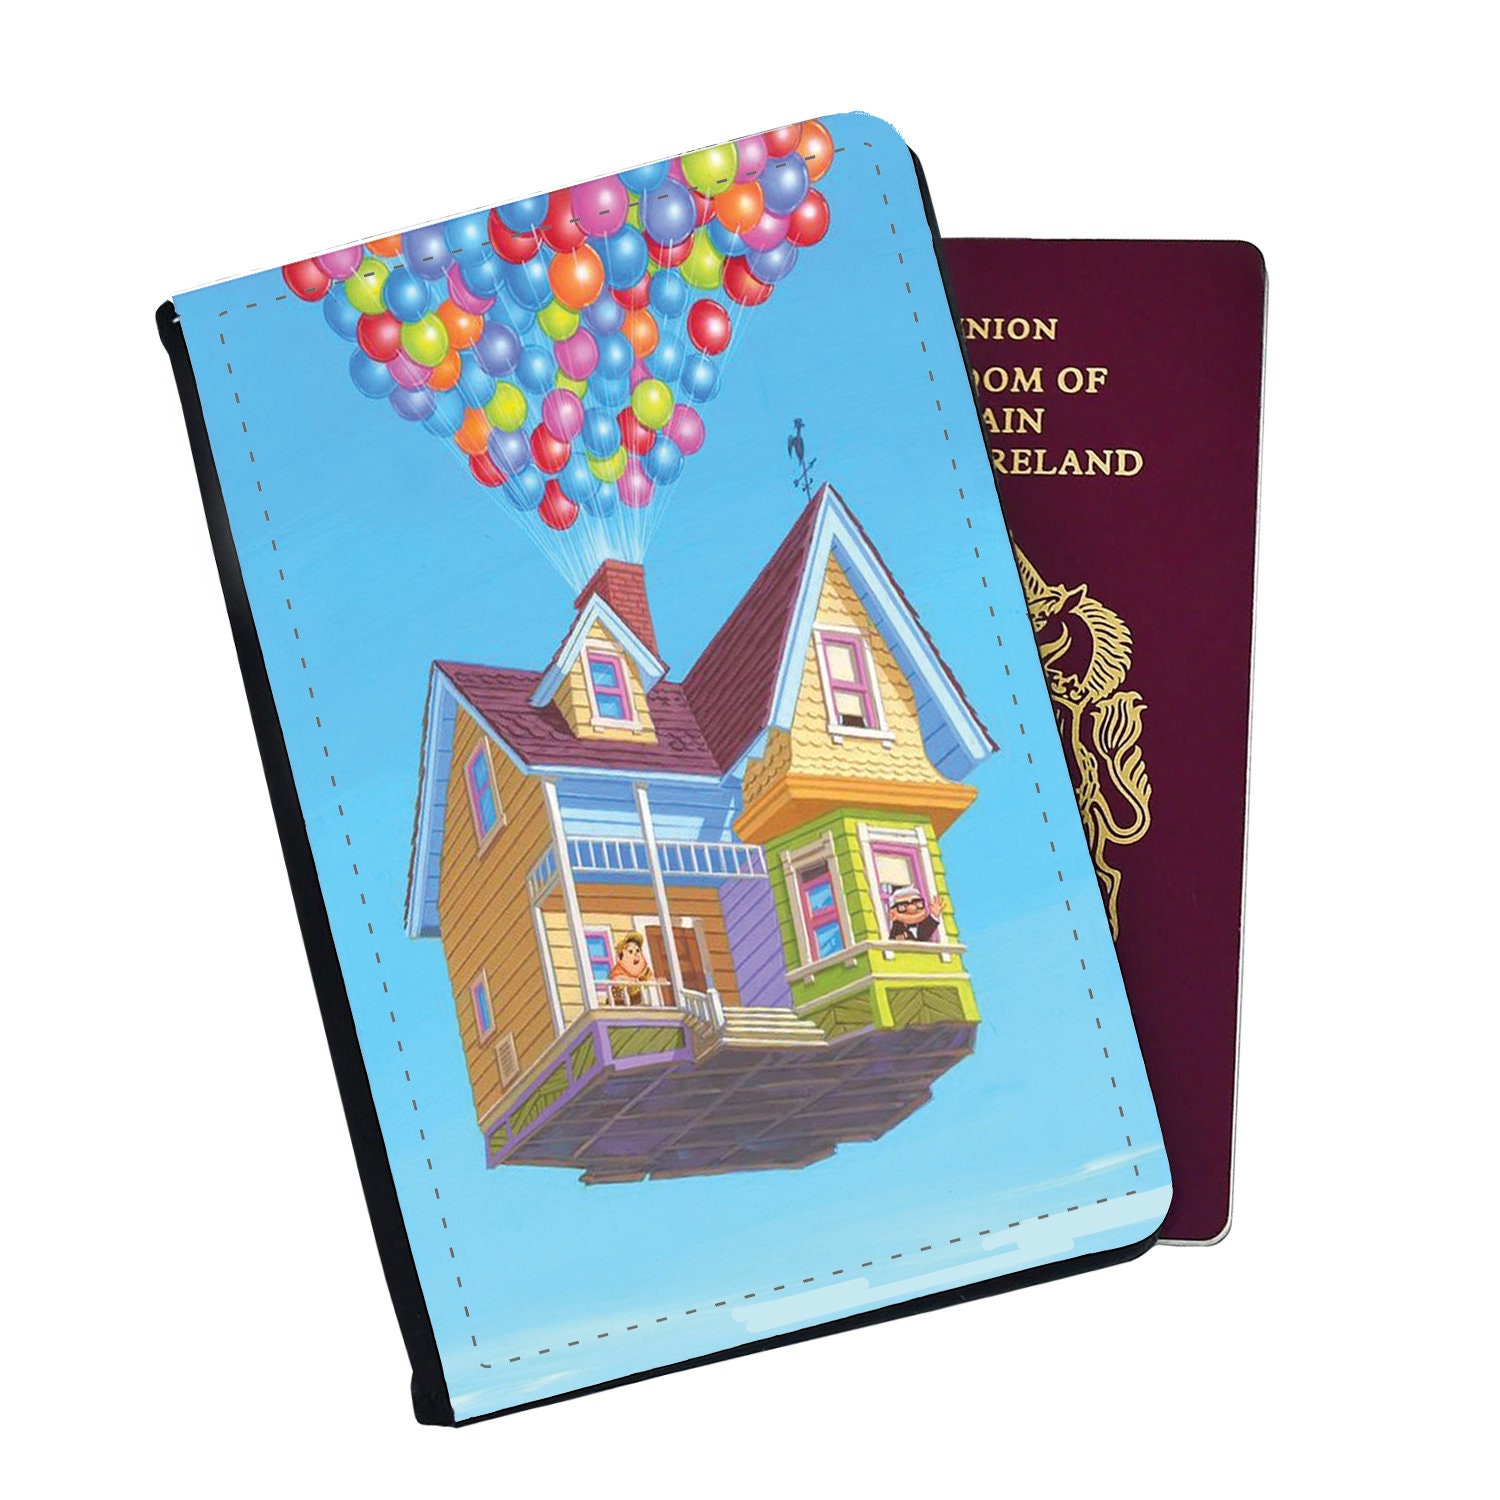 Personalised Faux Leather Passport Cover and Luggage Tag Disney Up House with Balloons Carl Ellie Disneyland Friends Birthday Gift